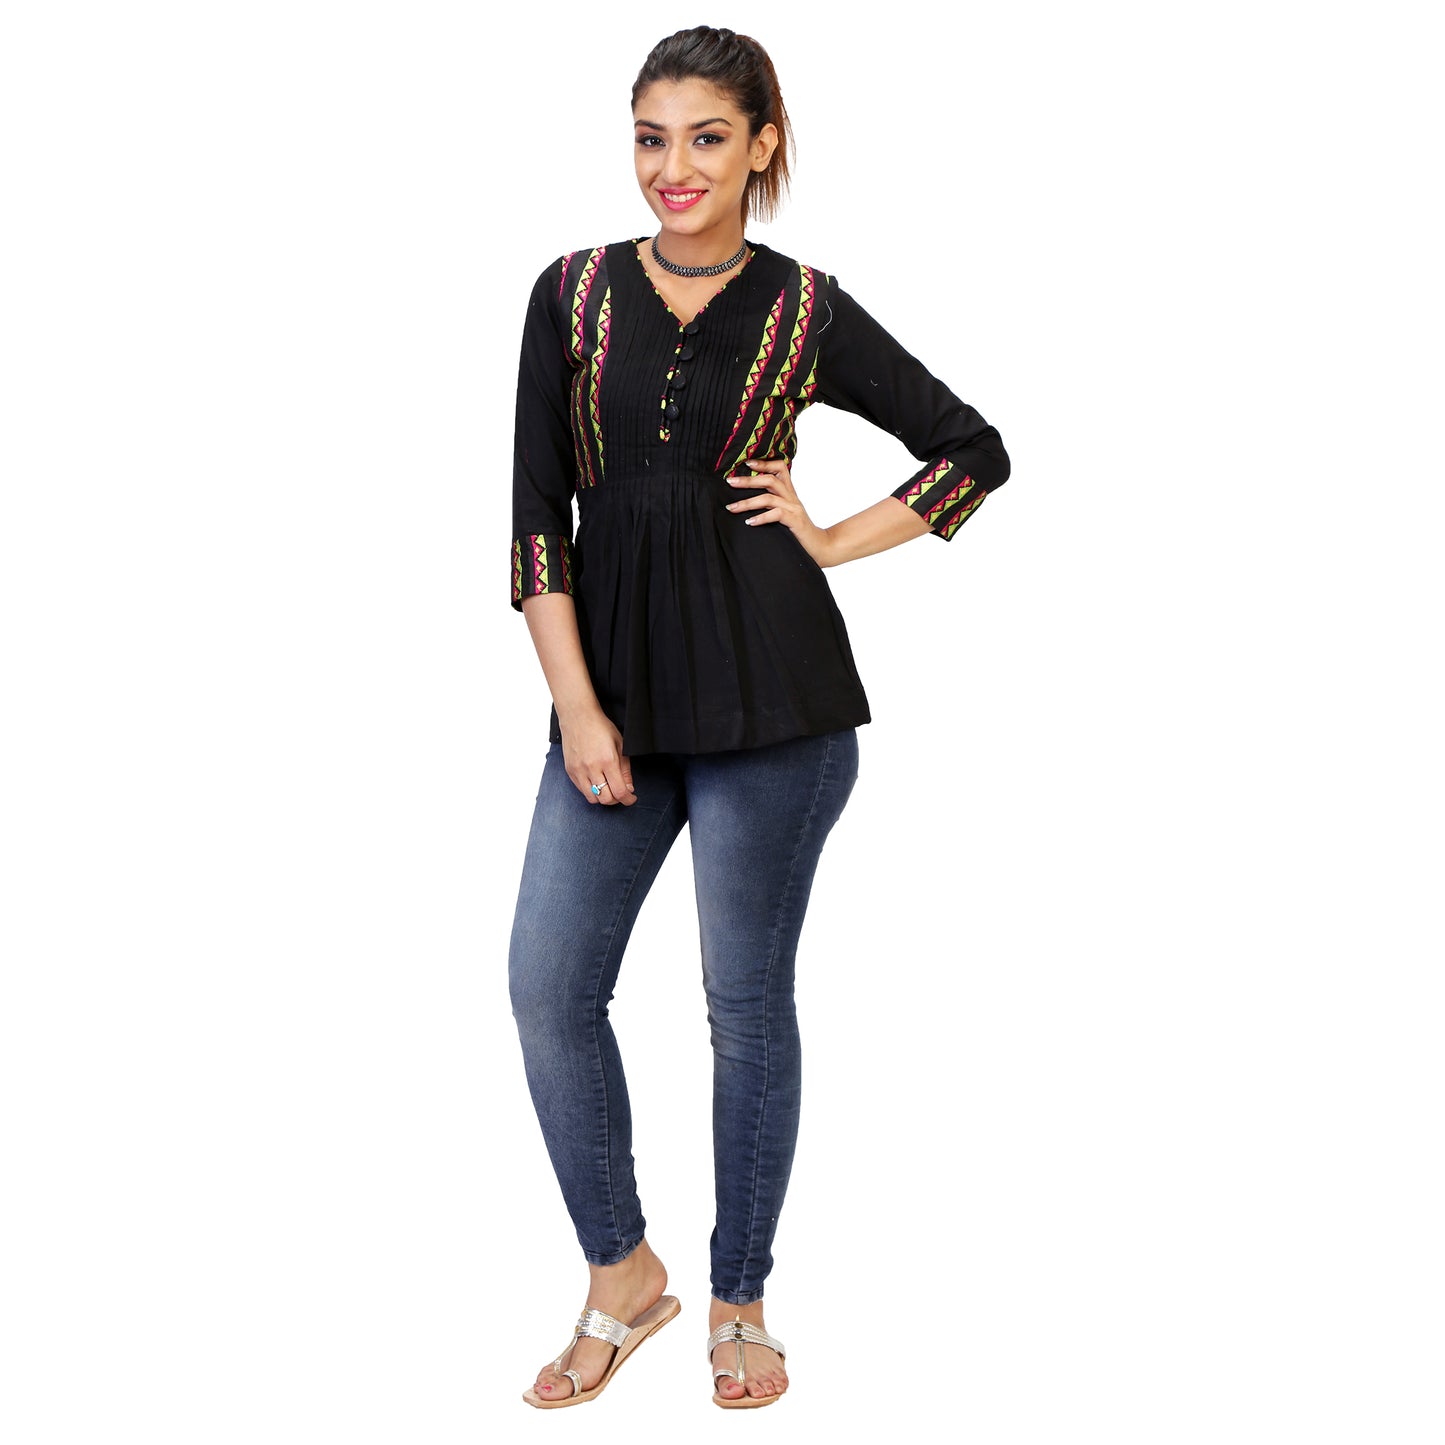 Midnight Black Top With Lacework & Button Detailing